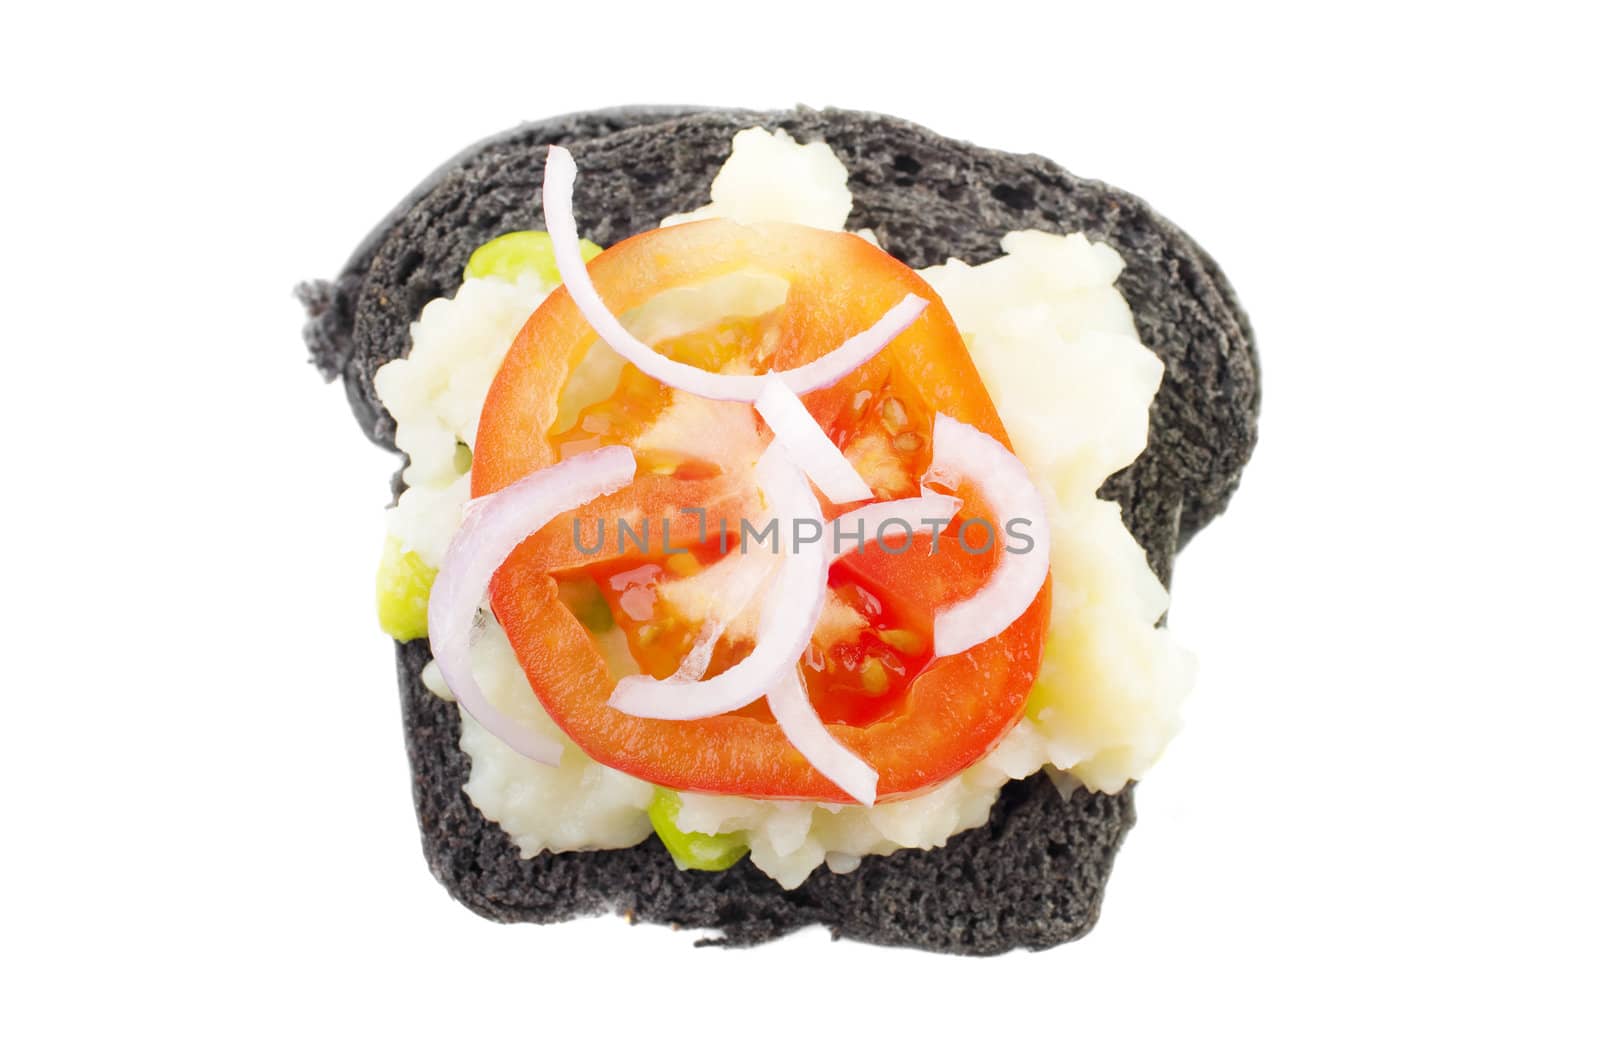 Black charcoal sandwich topped with mashed potato, tomato and onion.